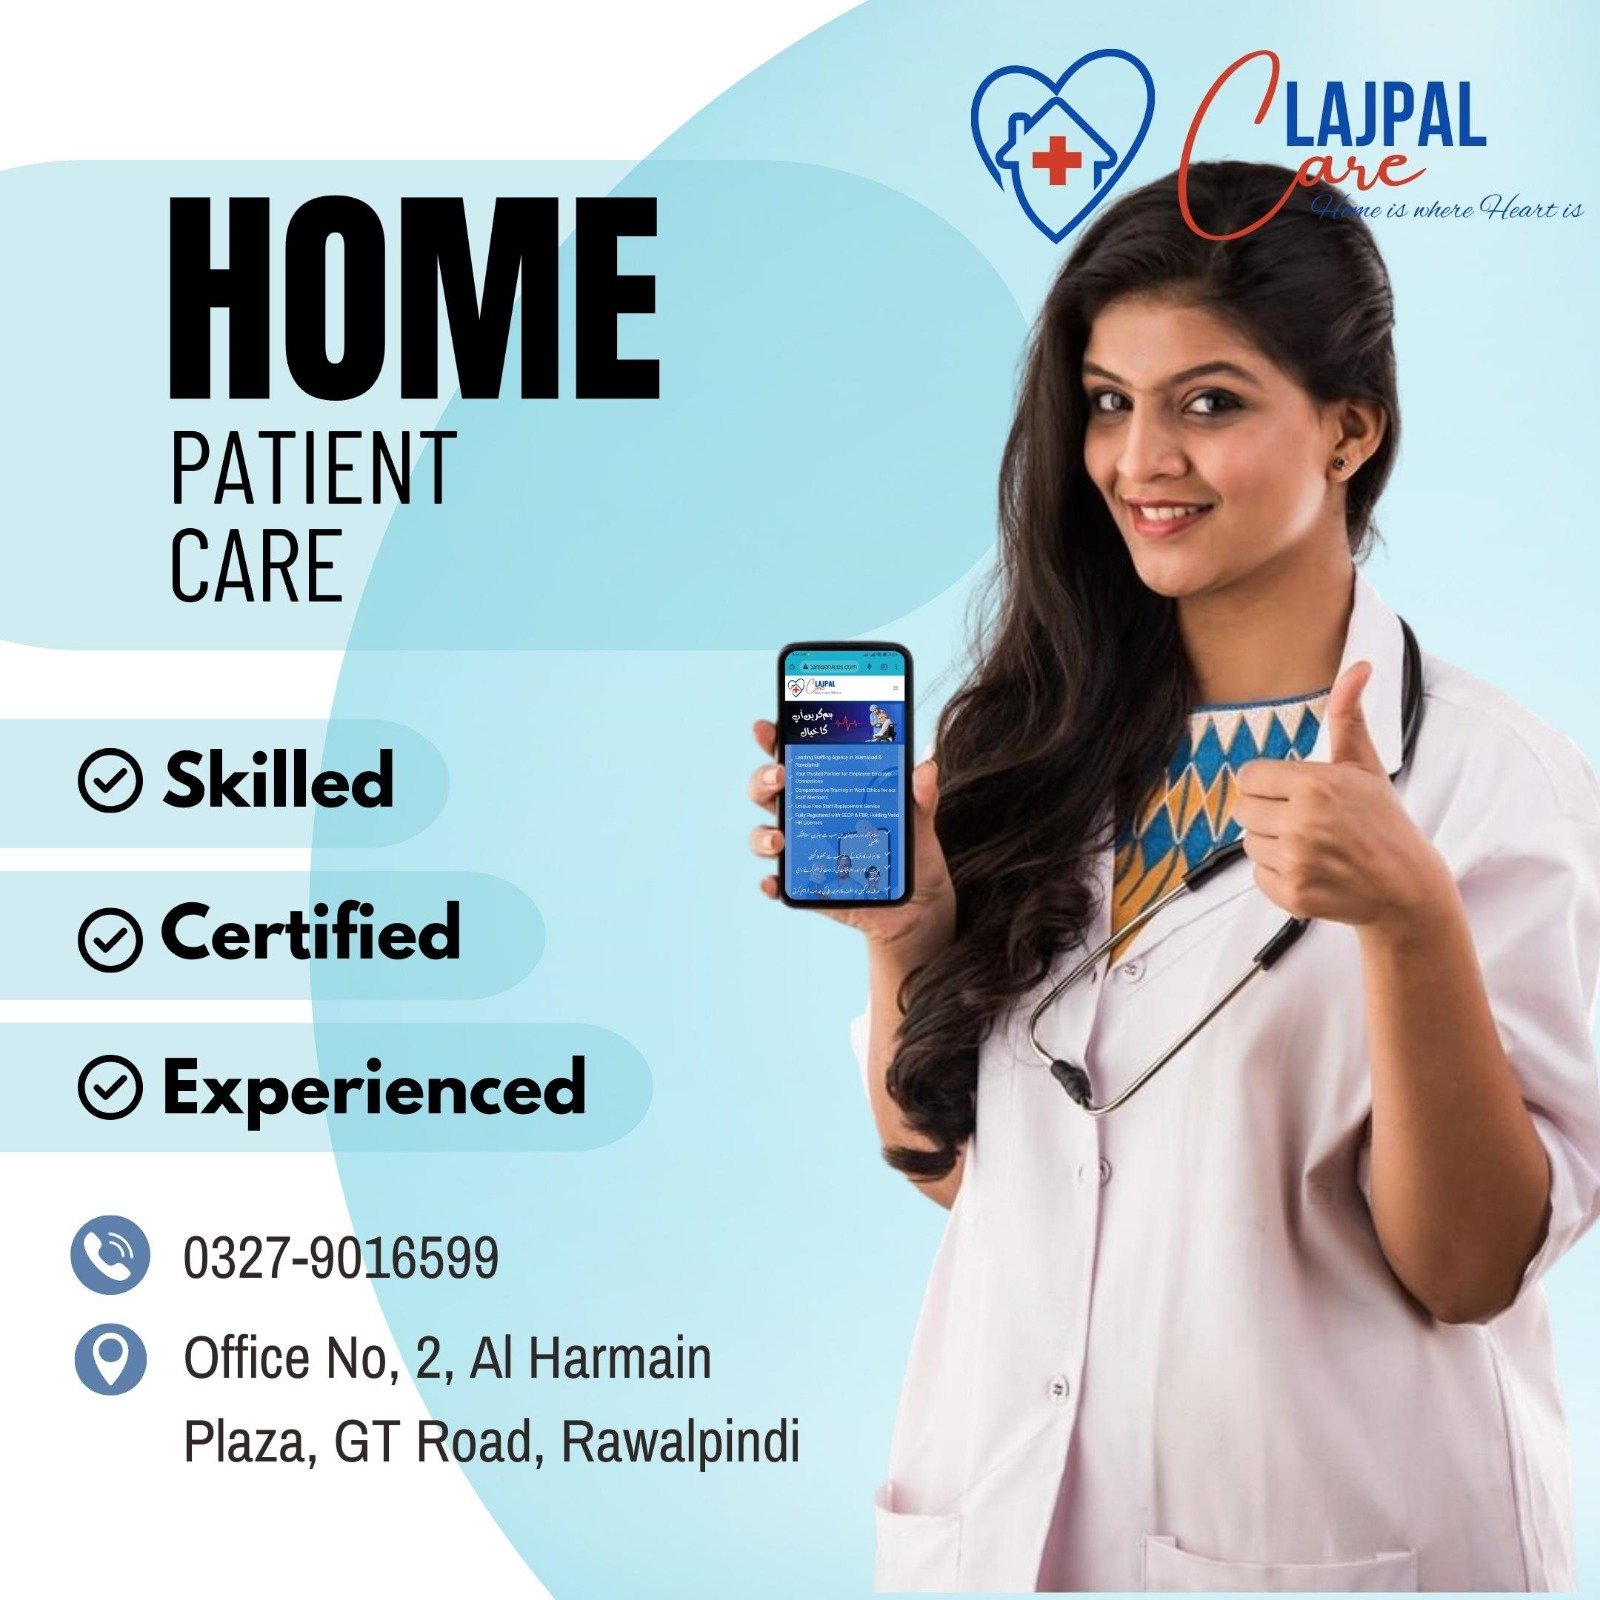 Home Care Services in RawalpindiHome Care Services in Islamabad